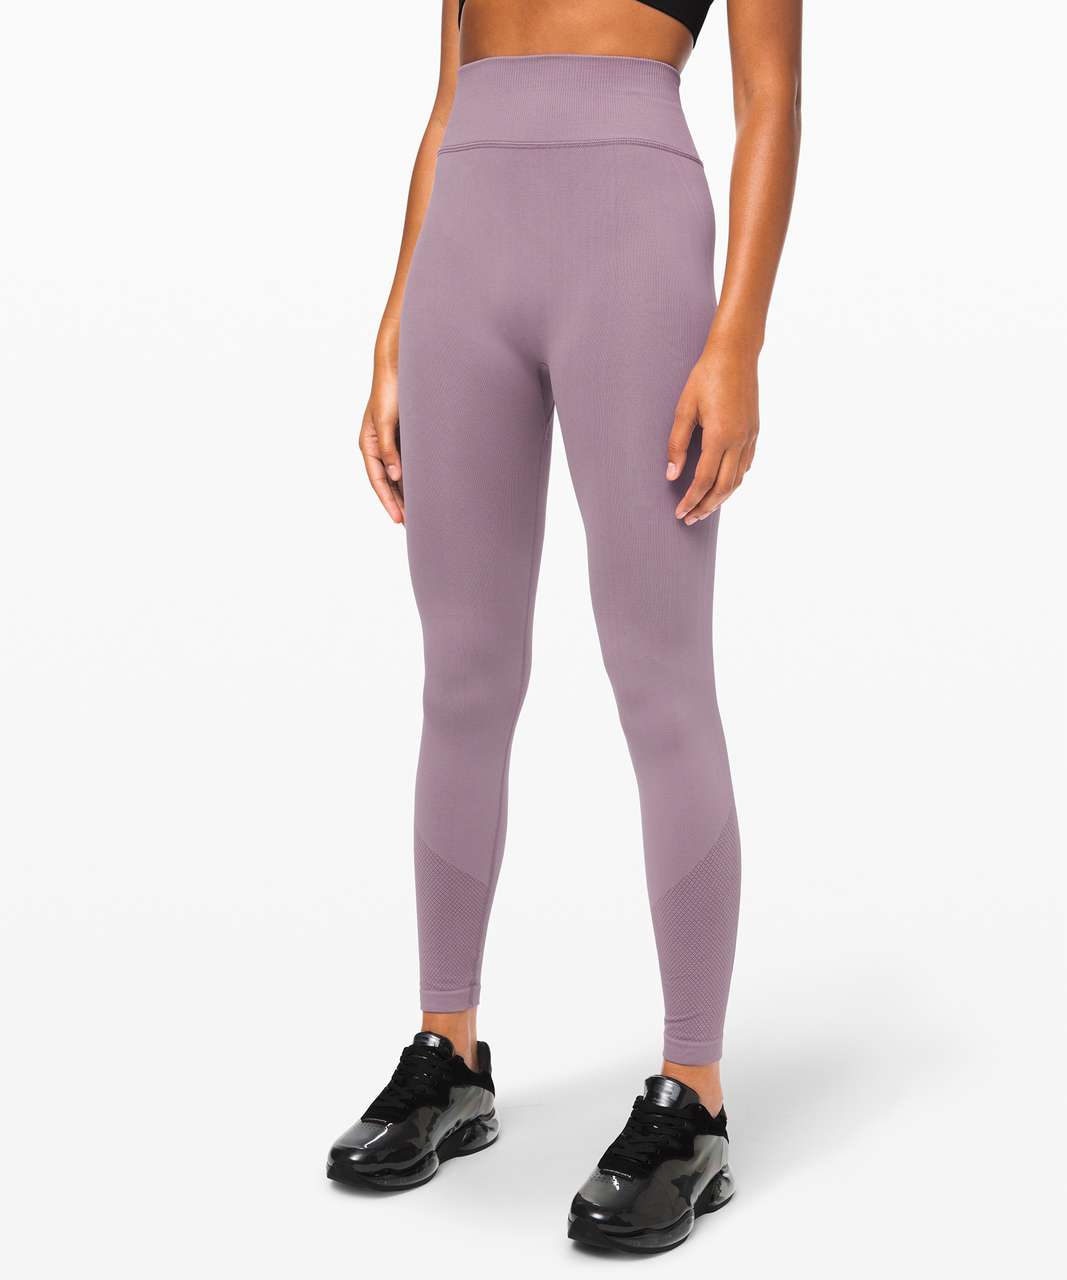 Lululemon Ebb to Street Tight - Frosted Mulberry